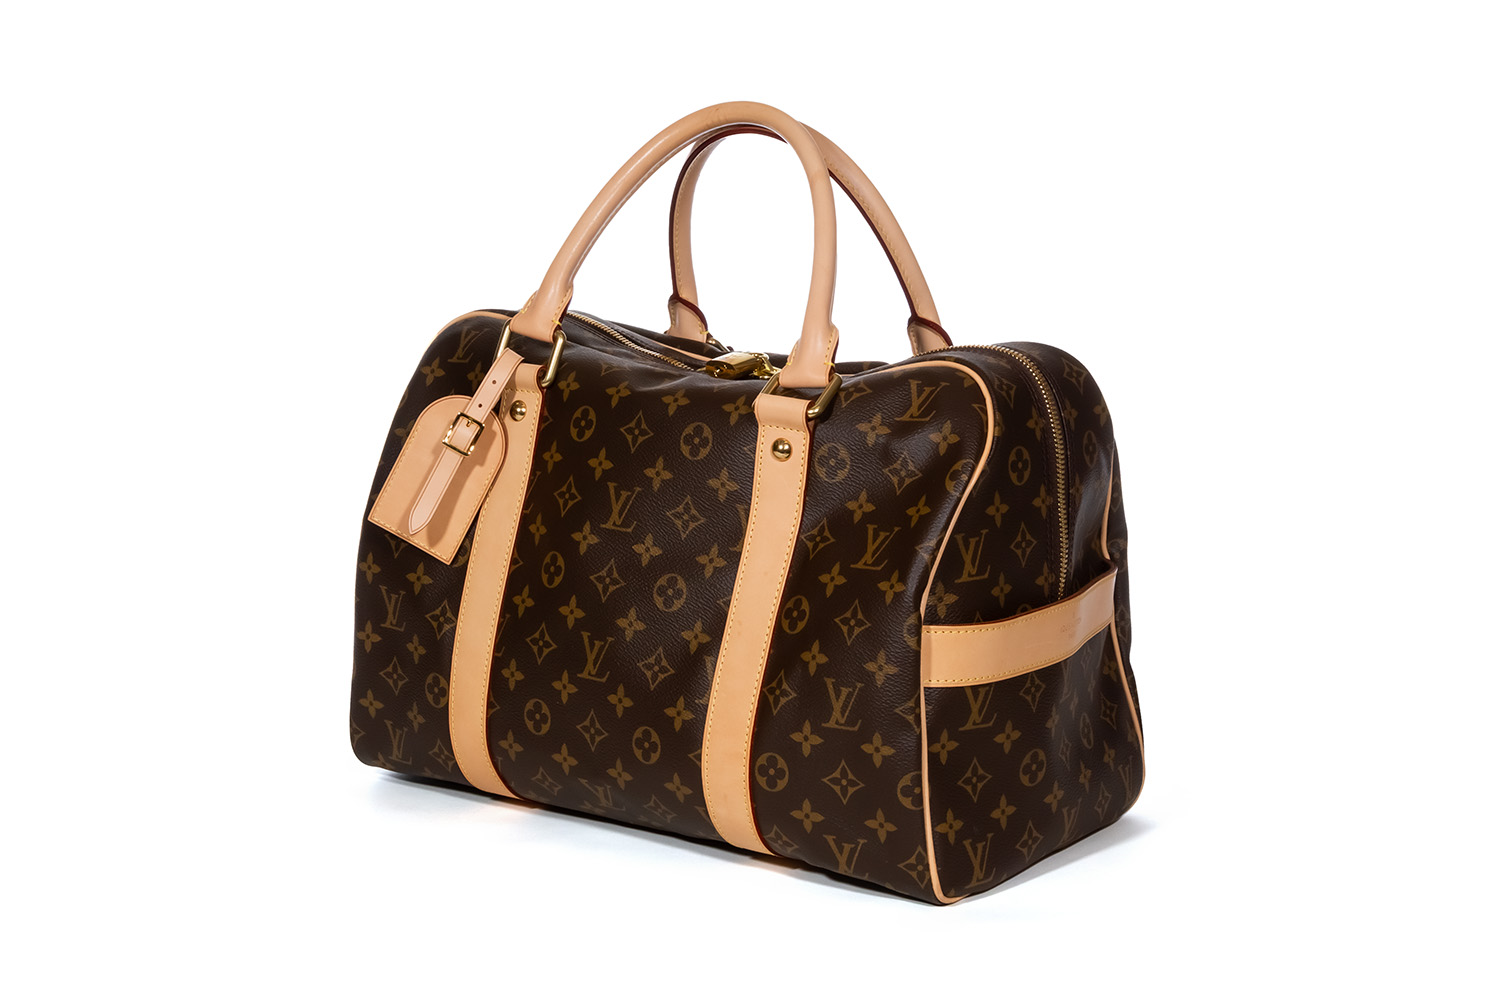 Louis Vuitton Carryall Duffle Monogram Canvas Boston Bag With Bandolier  Strap - Ideal Luxury